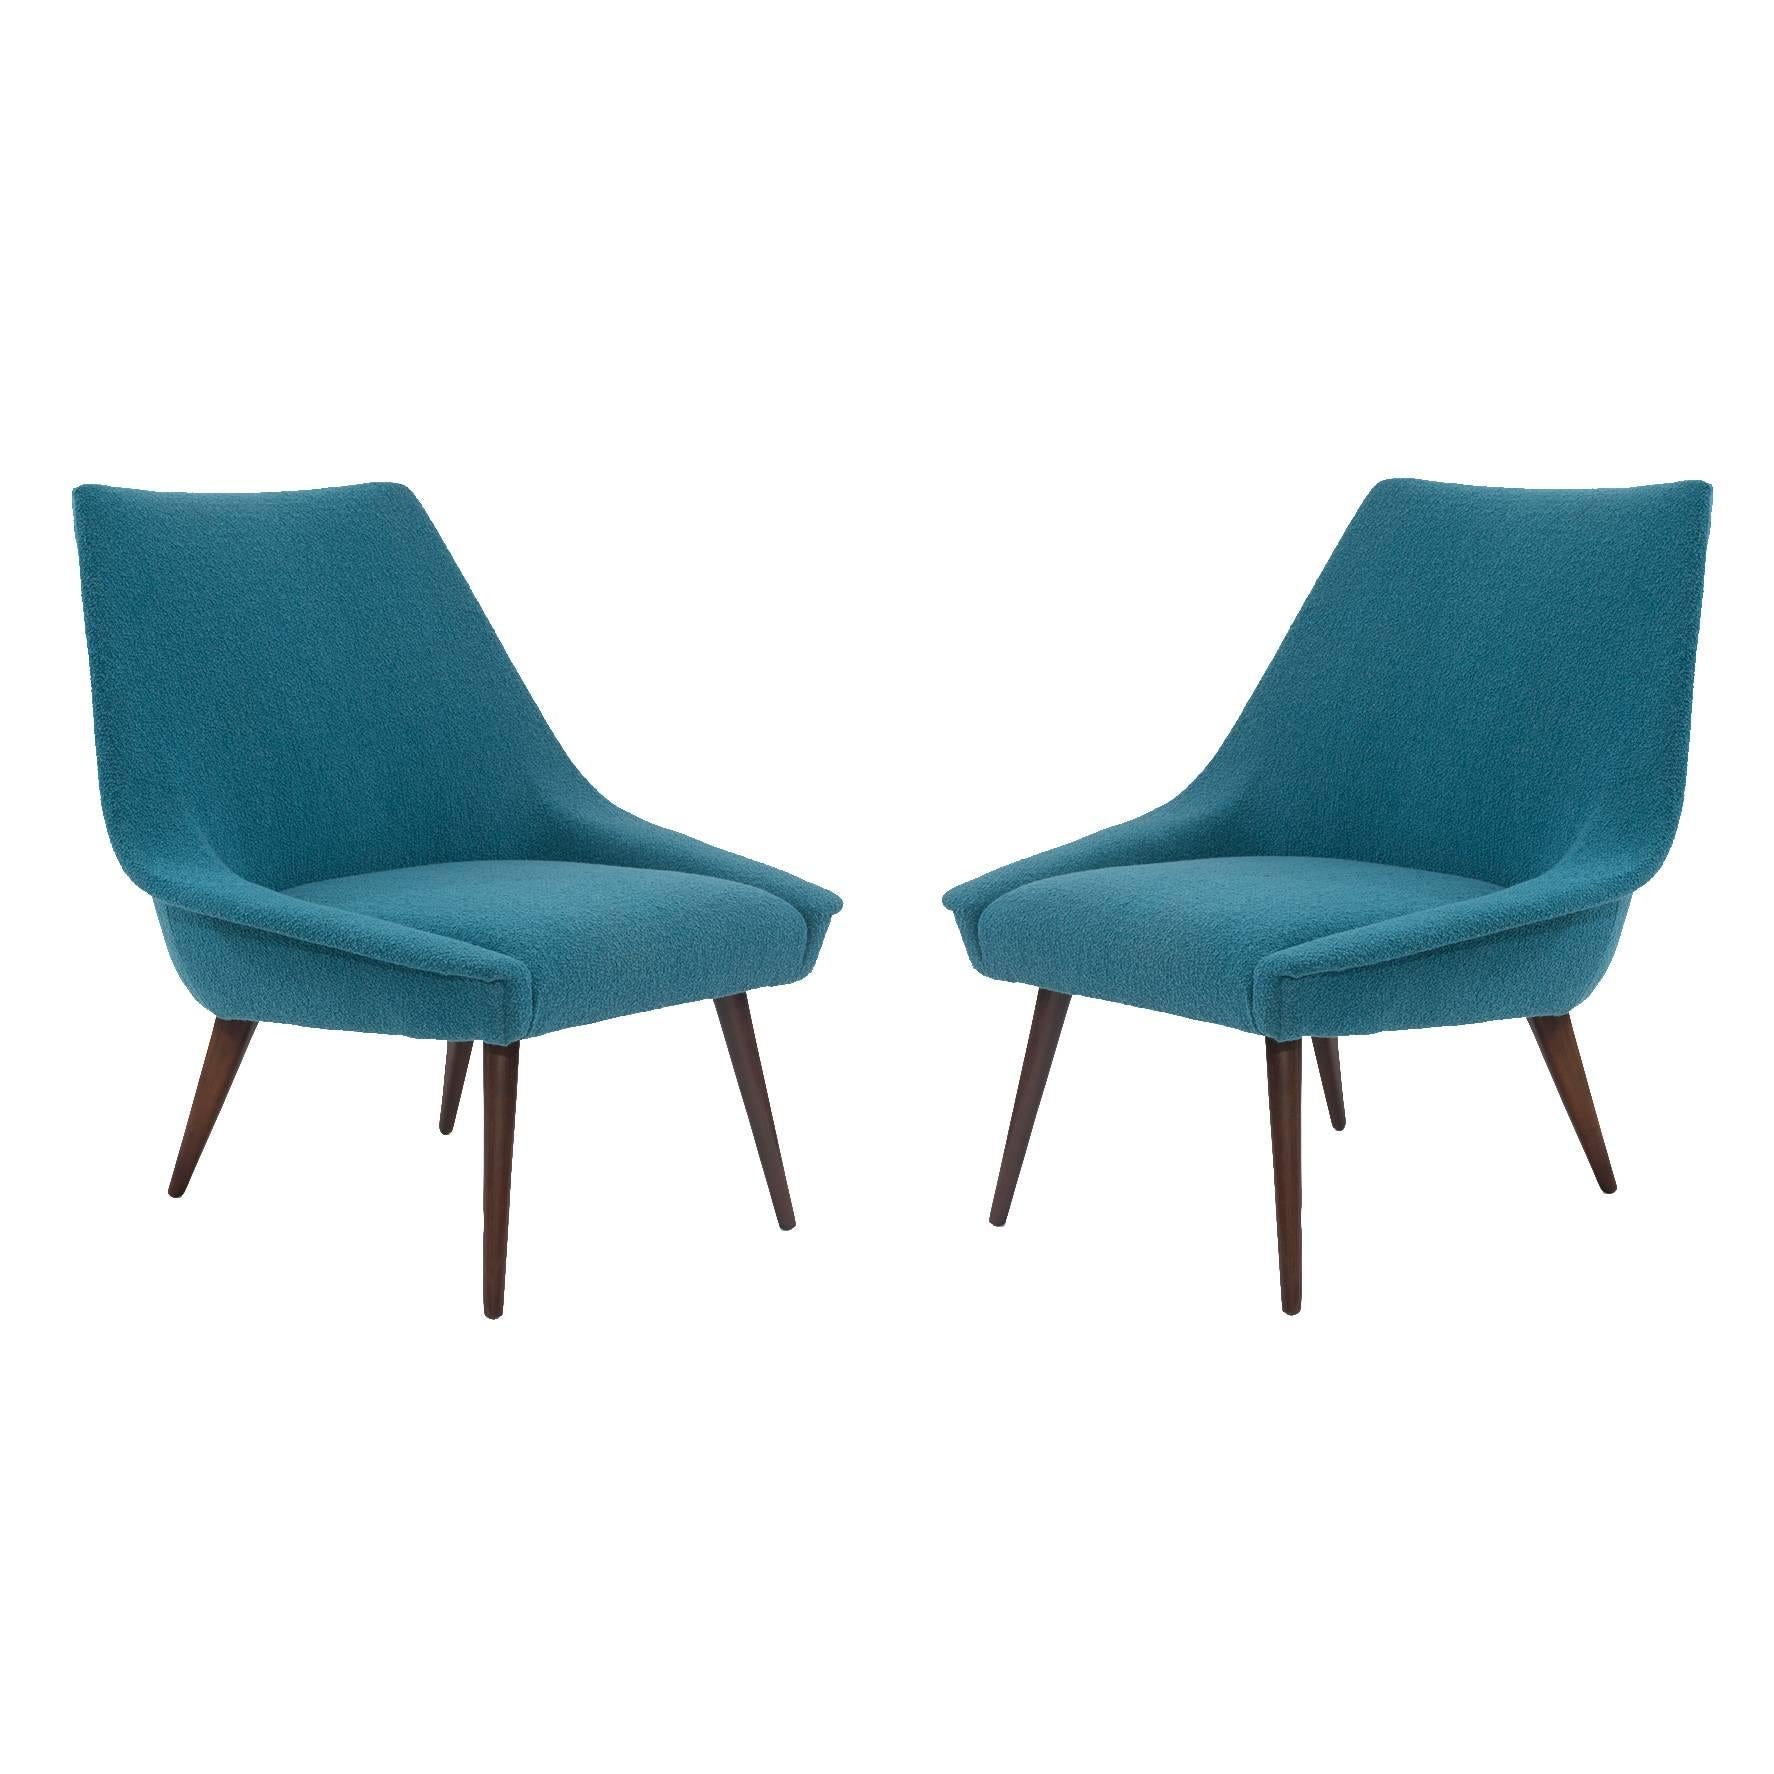 Pair of Sculptural Upholstered Lounge Chairs